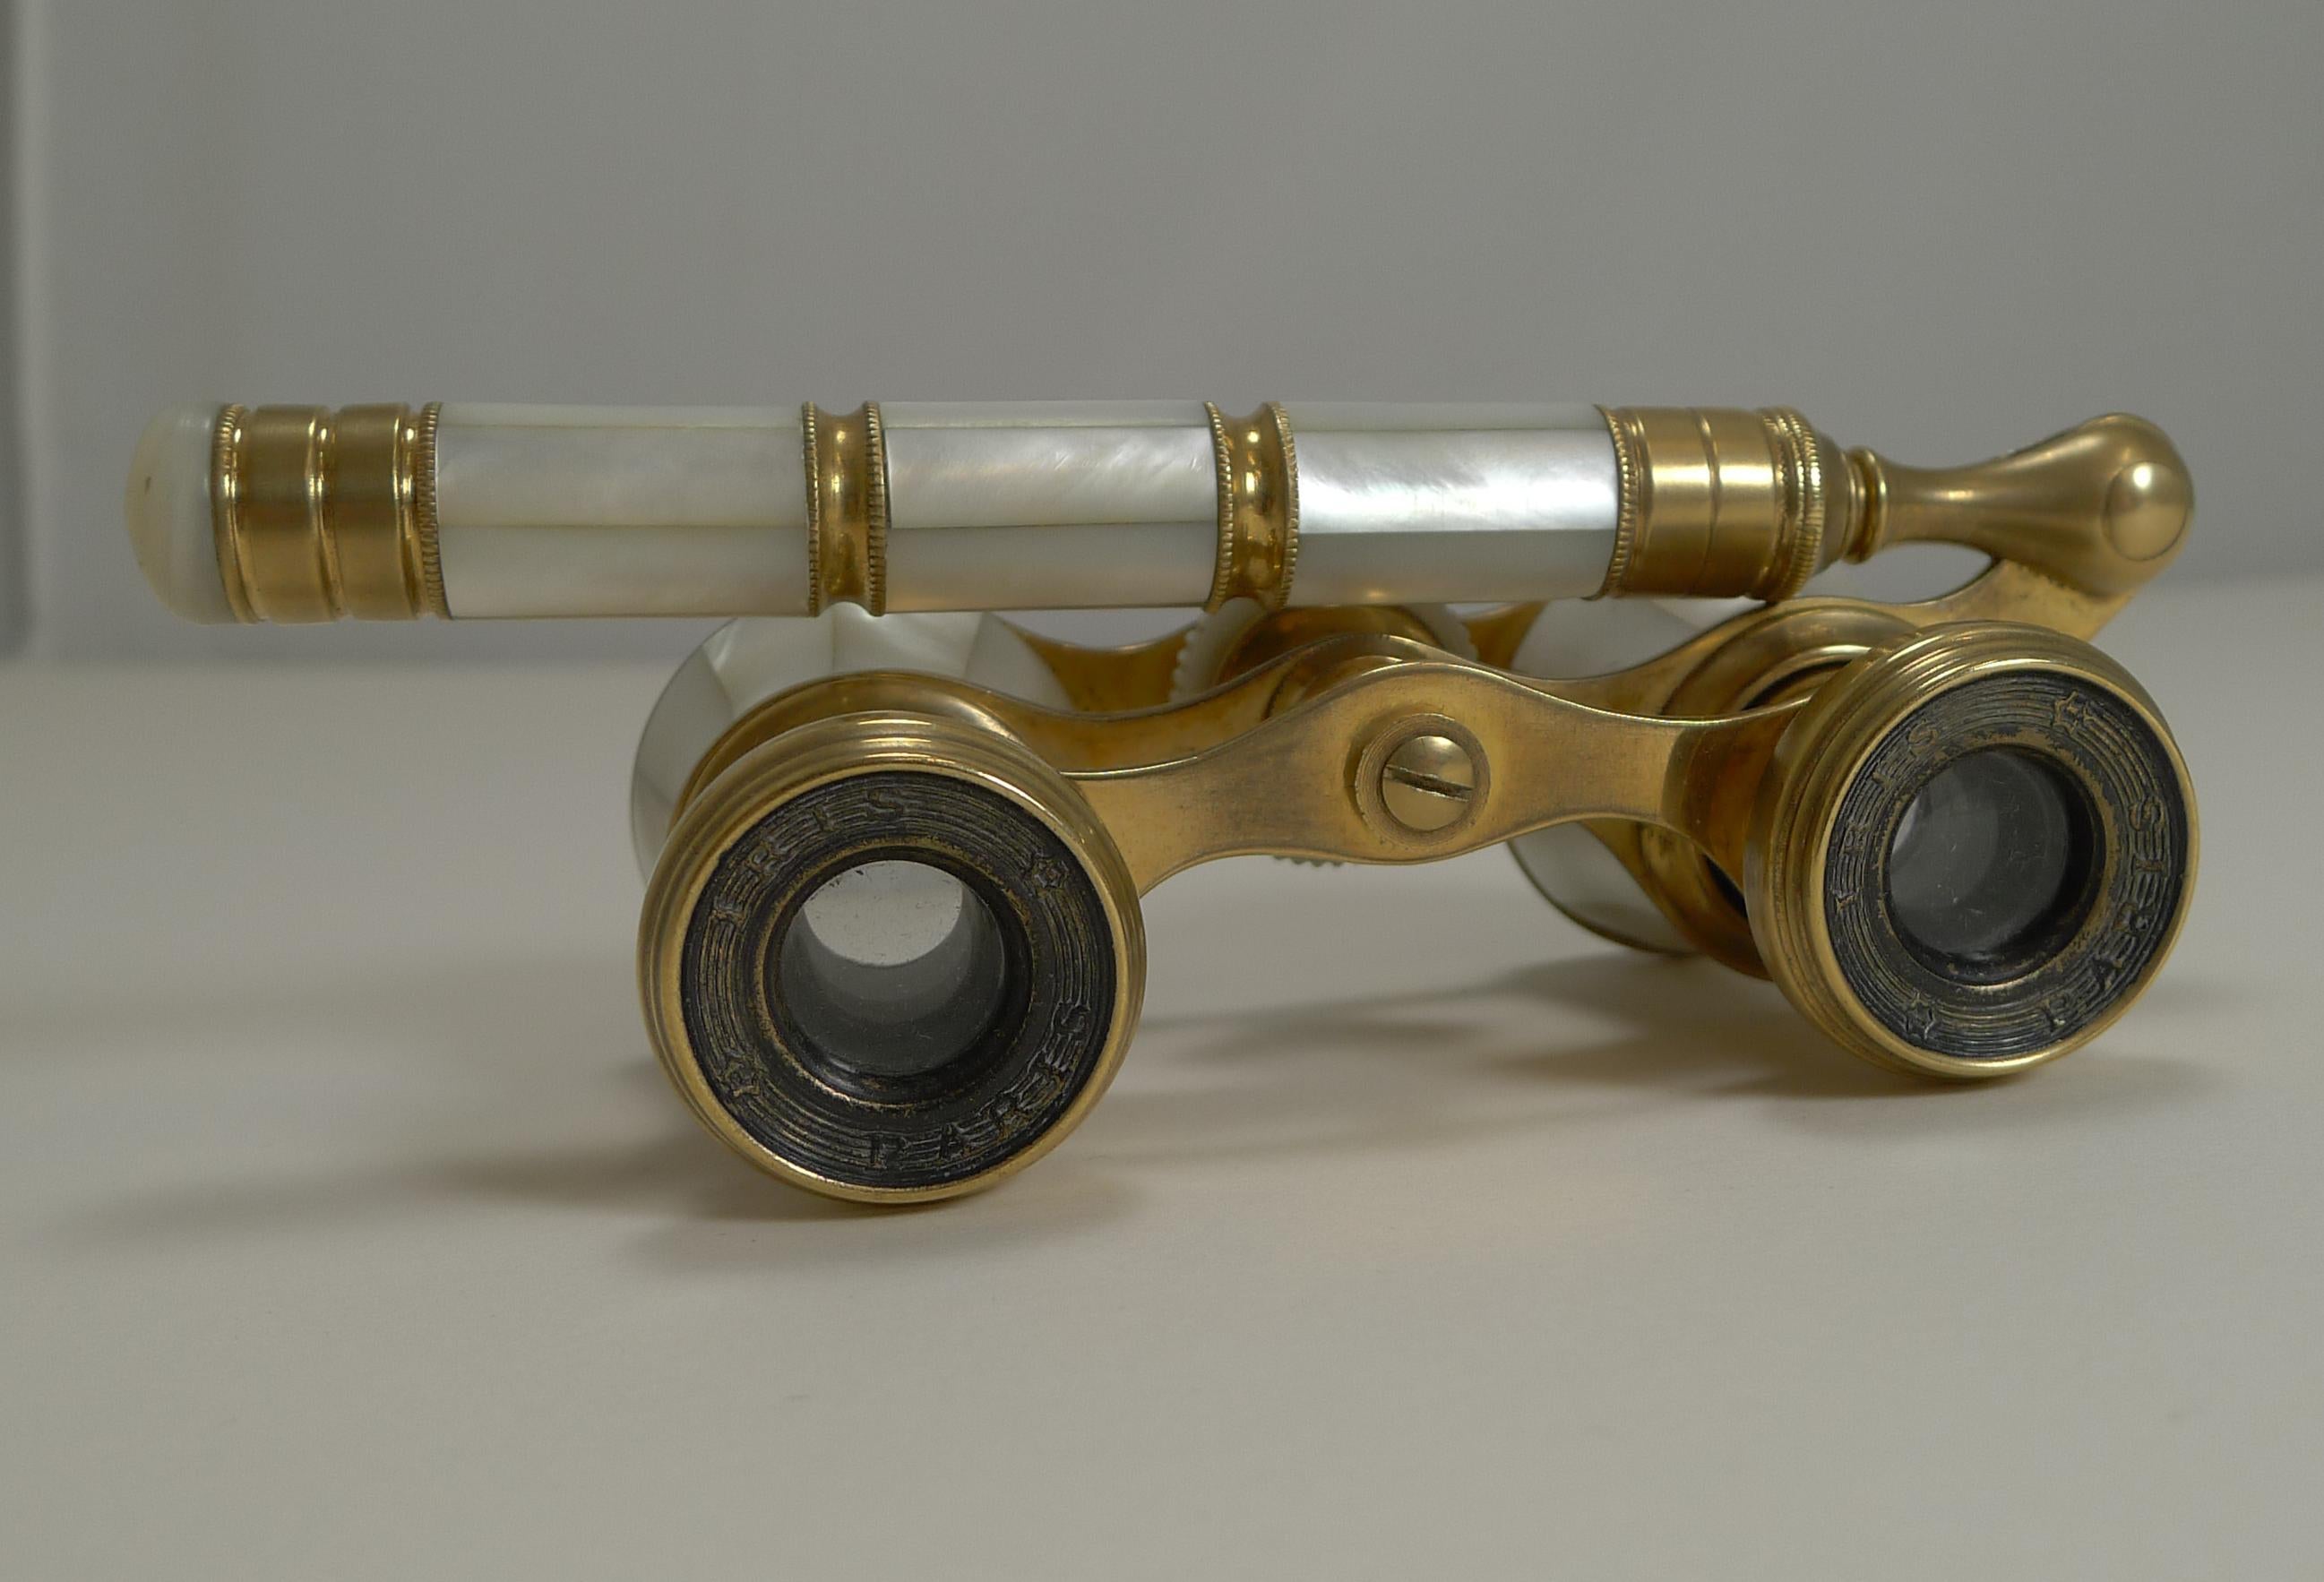 A stunning pair of late Victorian or Edwardian Opera glasses dating to the turn of the century, circa 1900. French in origin, each eye piece is signed, Iris, Paris. The underside of the frame is also marked for Iris (